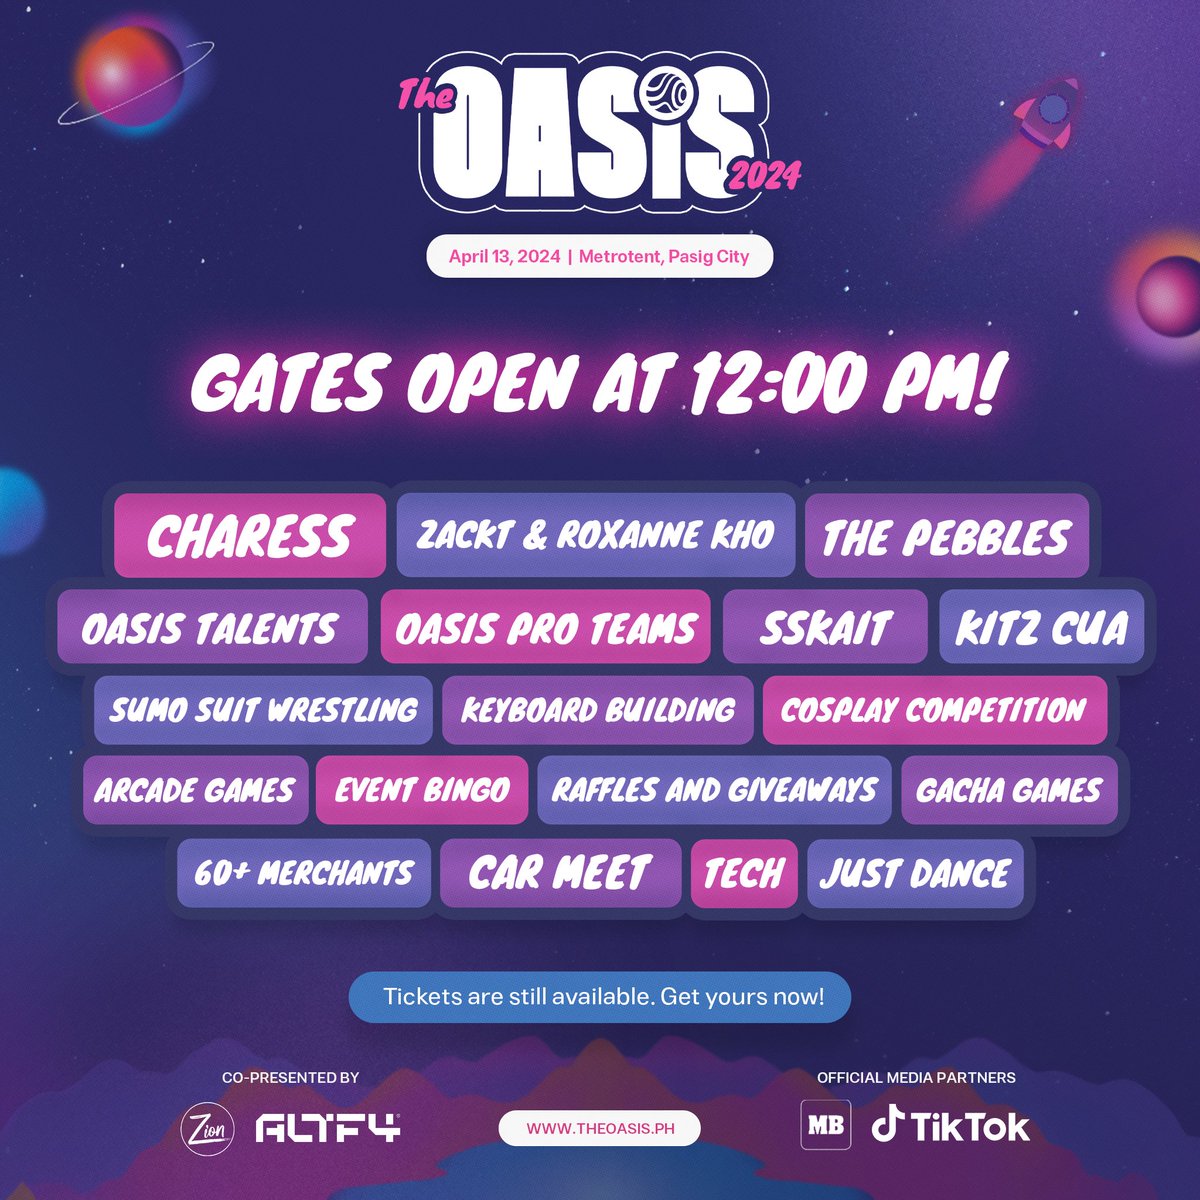 We are opening the gates to The OASIS!  

The OASIS opens at 12PM! If it gets too hot outside, we will open the gates earlier.  

See you tomorrow 🛸

#TheOASIS2024 #SinceDayOne